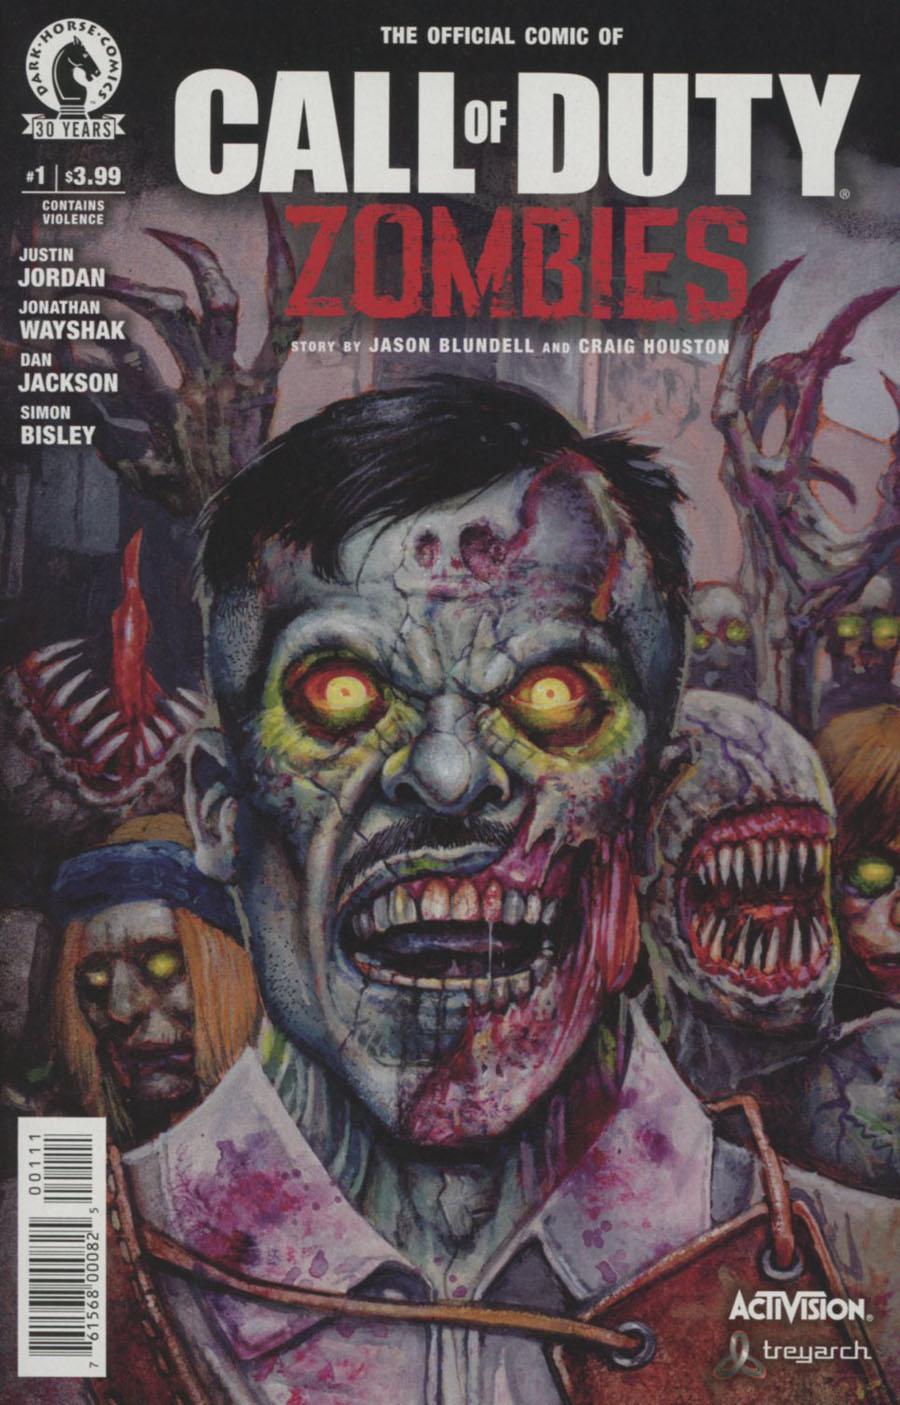 Call Of Duty Zombies Vol. 1 #1